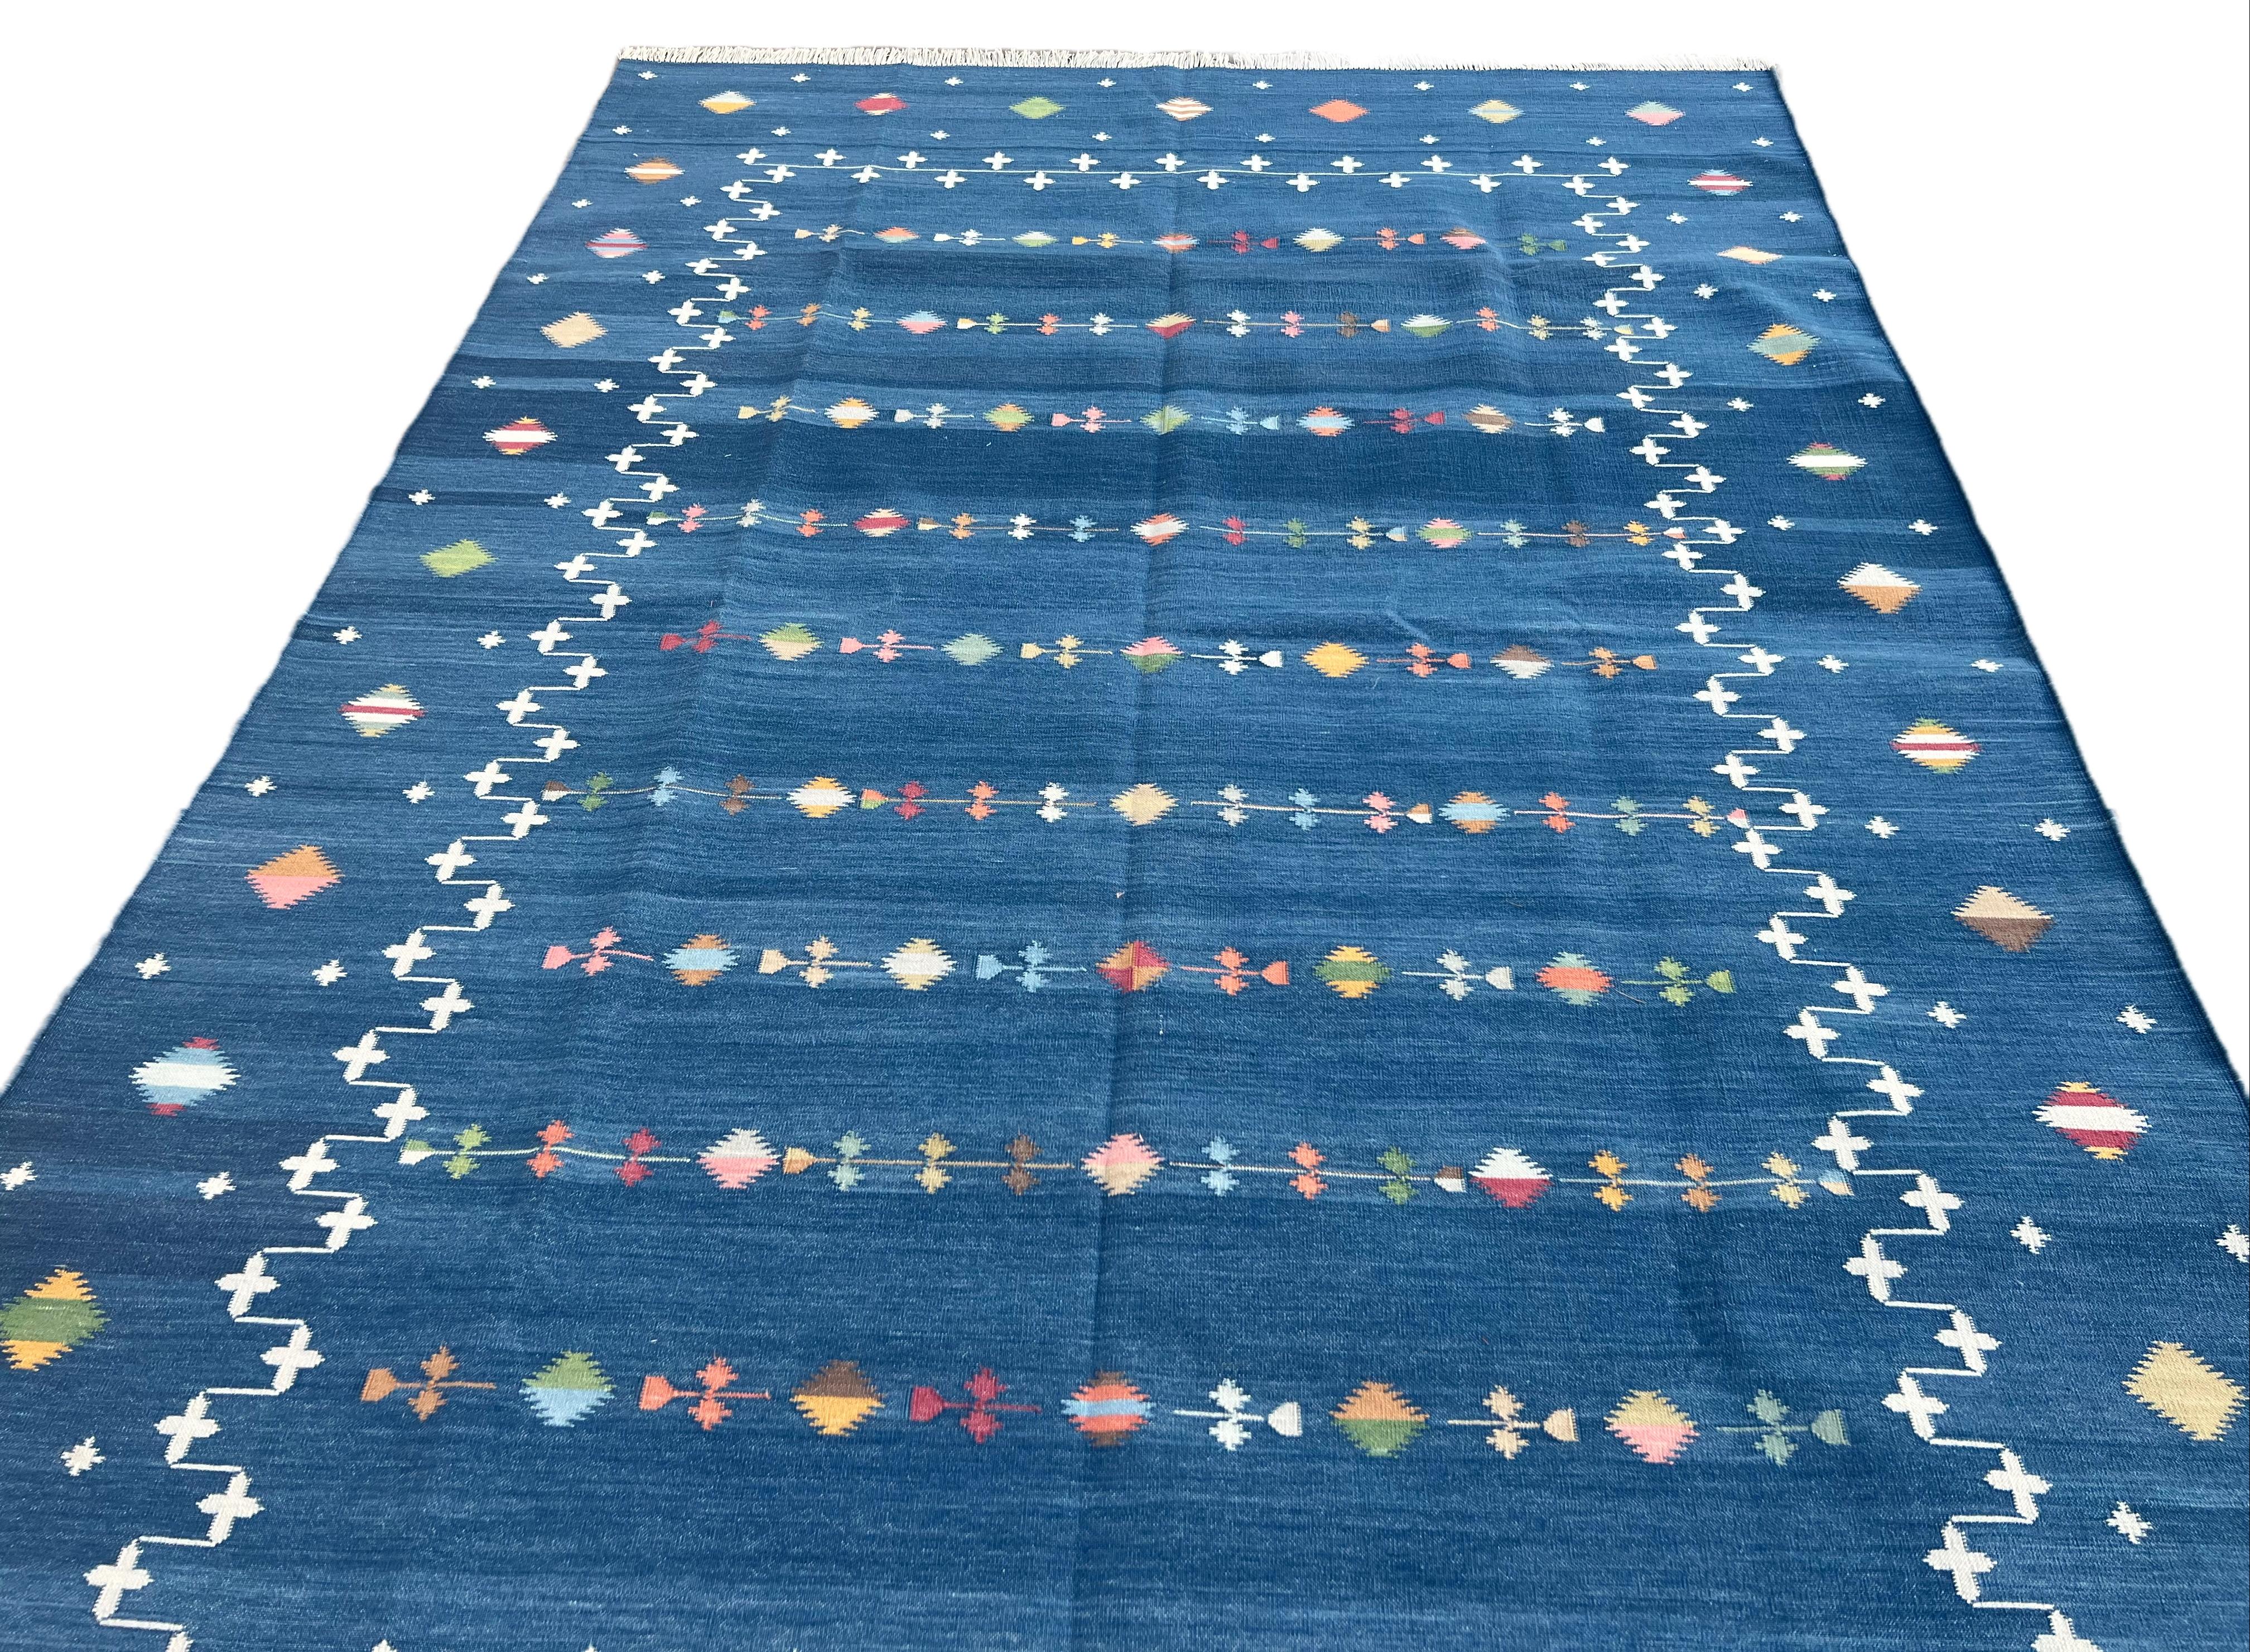 Contemporary Handmade Cotton Area Flat Weave Rug, Blue And White Indian Shooting Star Dhurrie For Sale